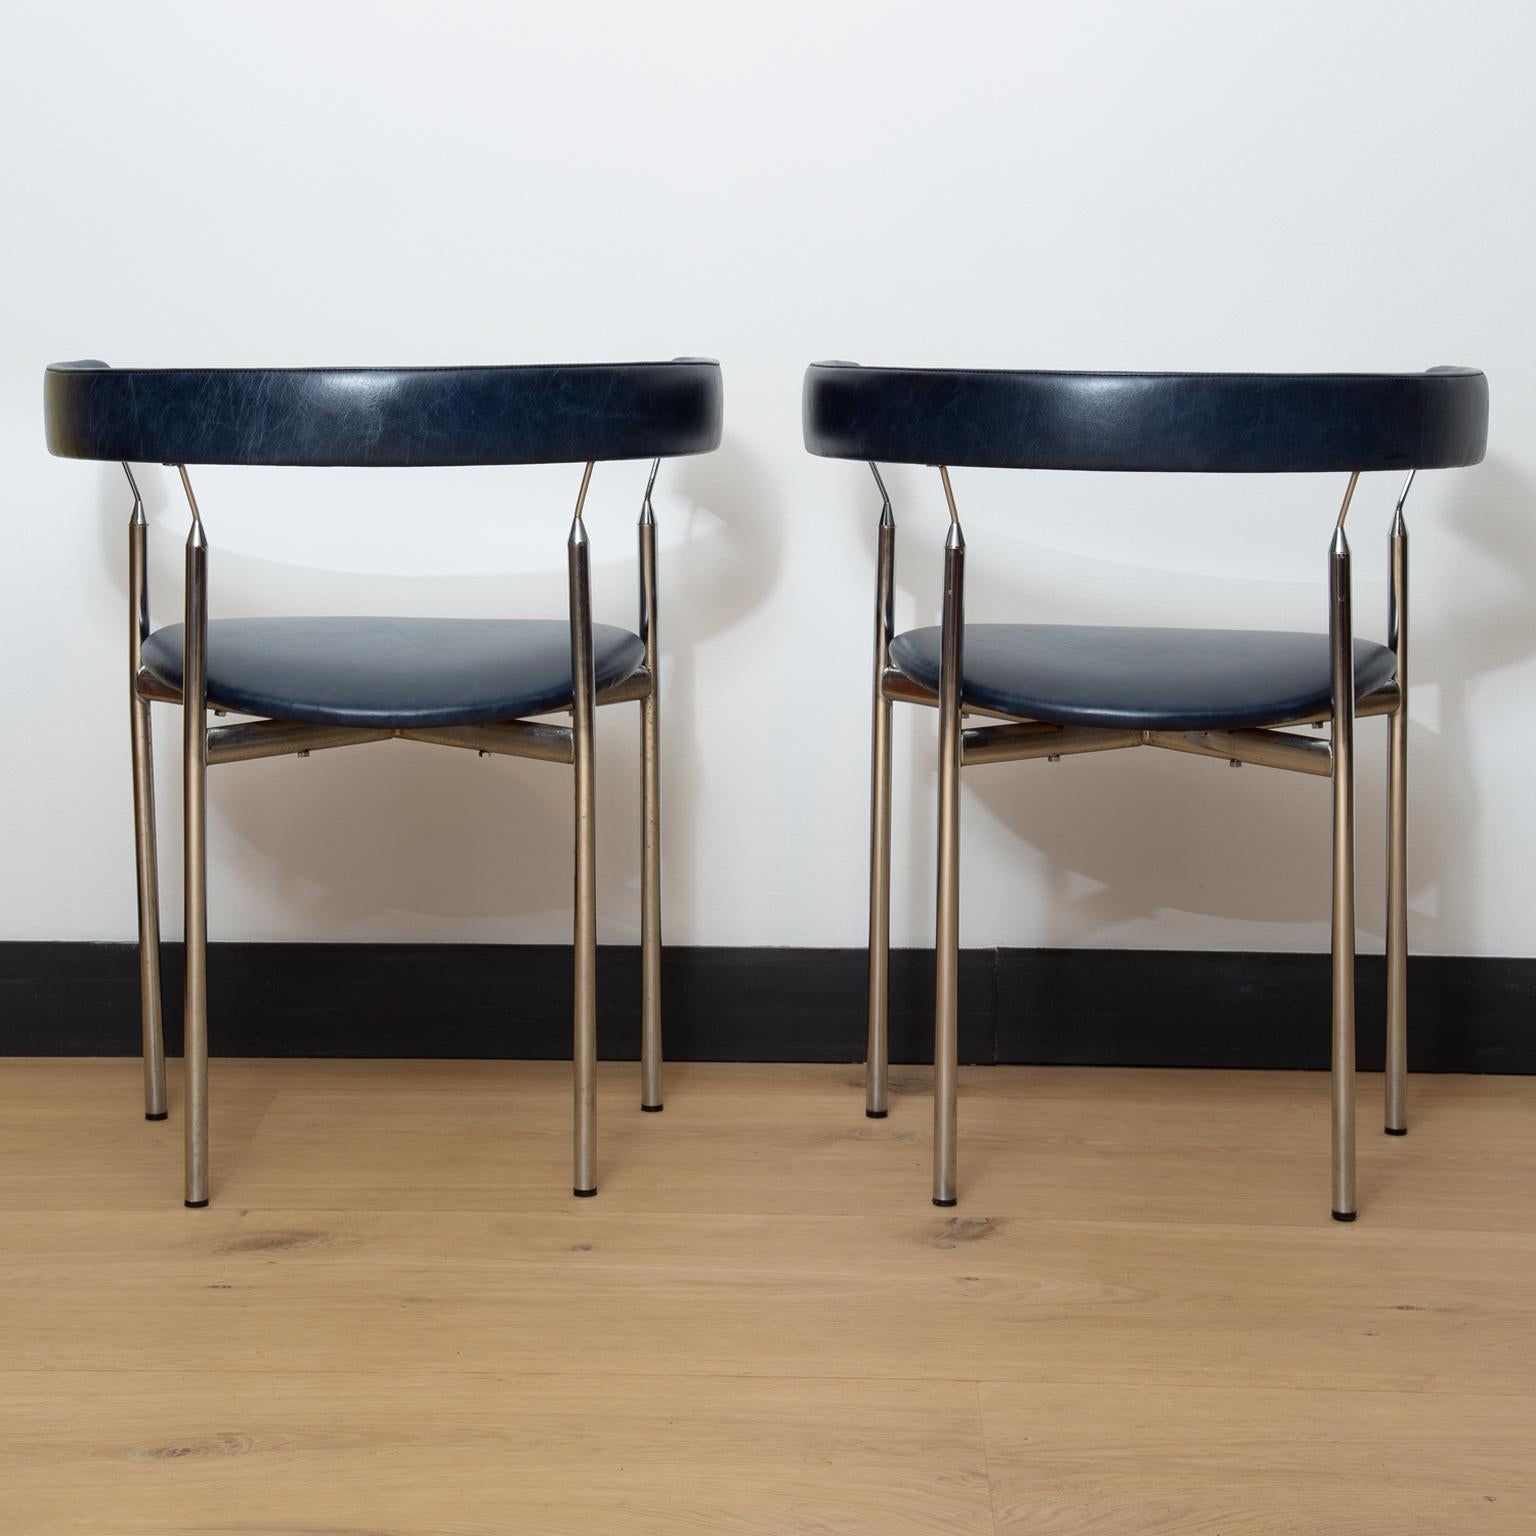 A pair of chrome frame 'Rondo' chairs designed by Jan Lunde Knudsen for Sorlie Møbler.
The chairs have been reupholstered in navy blue Italian leather.